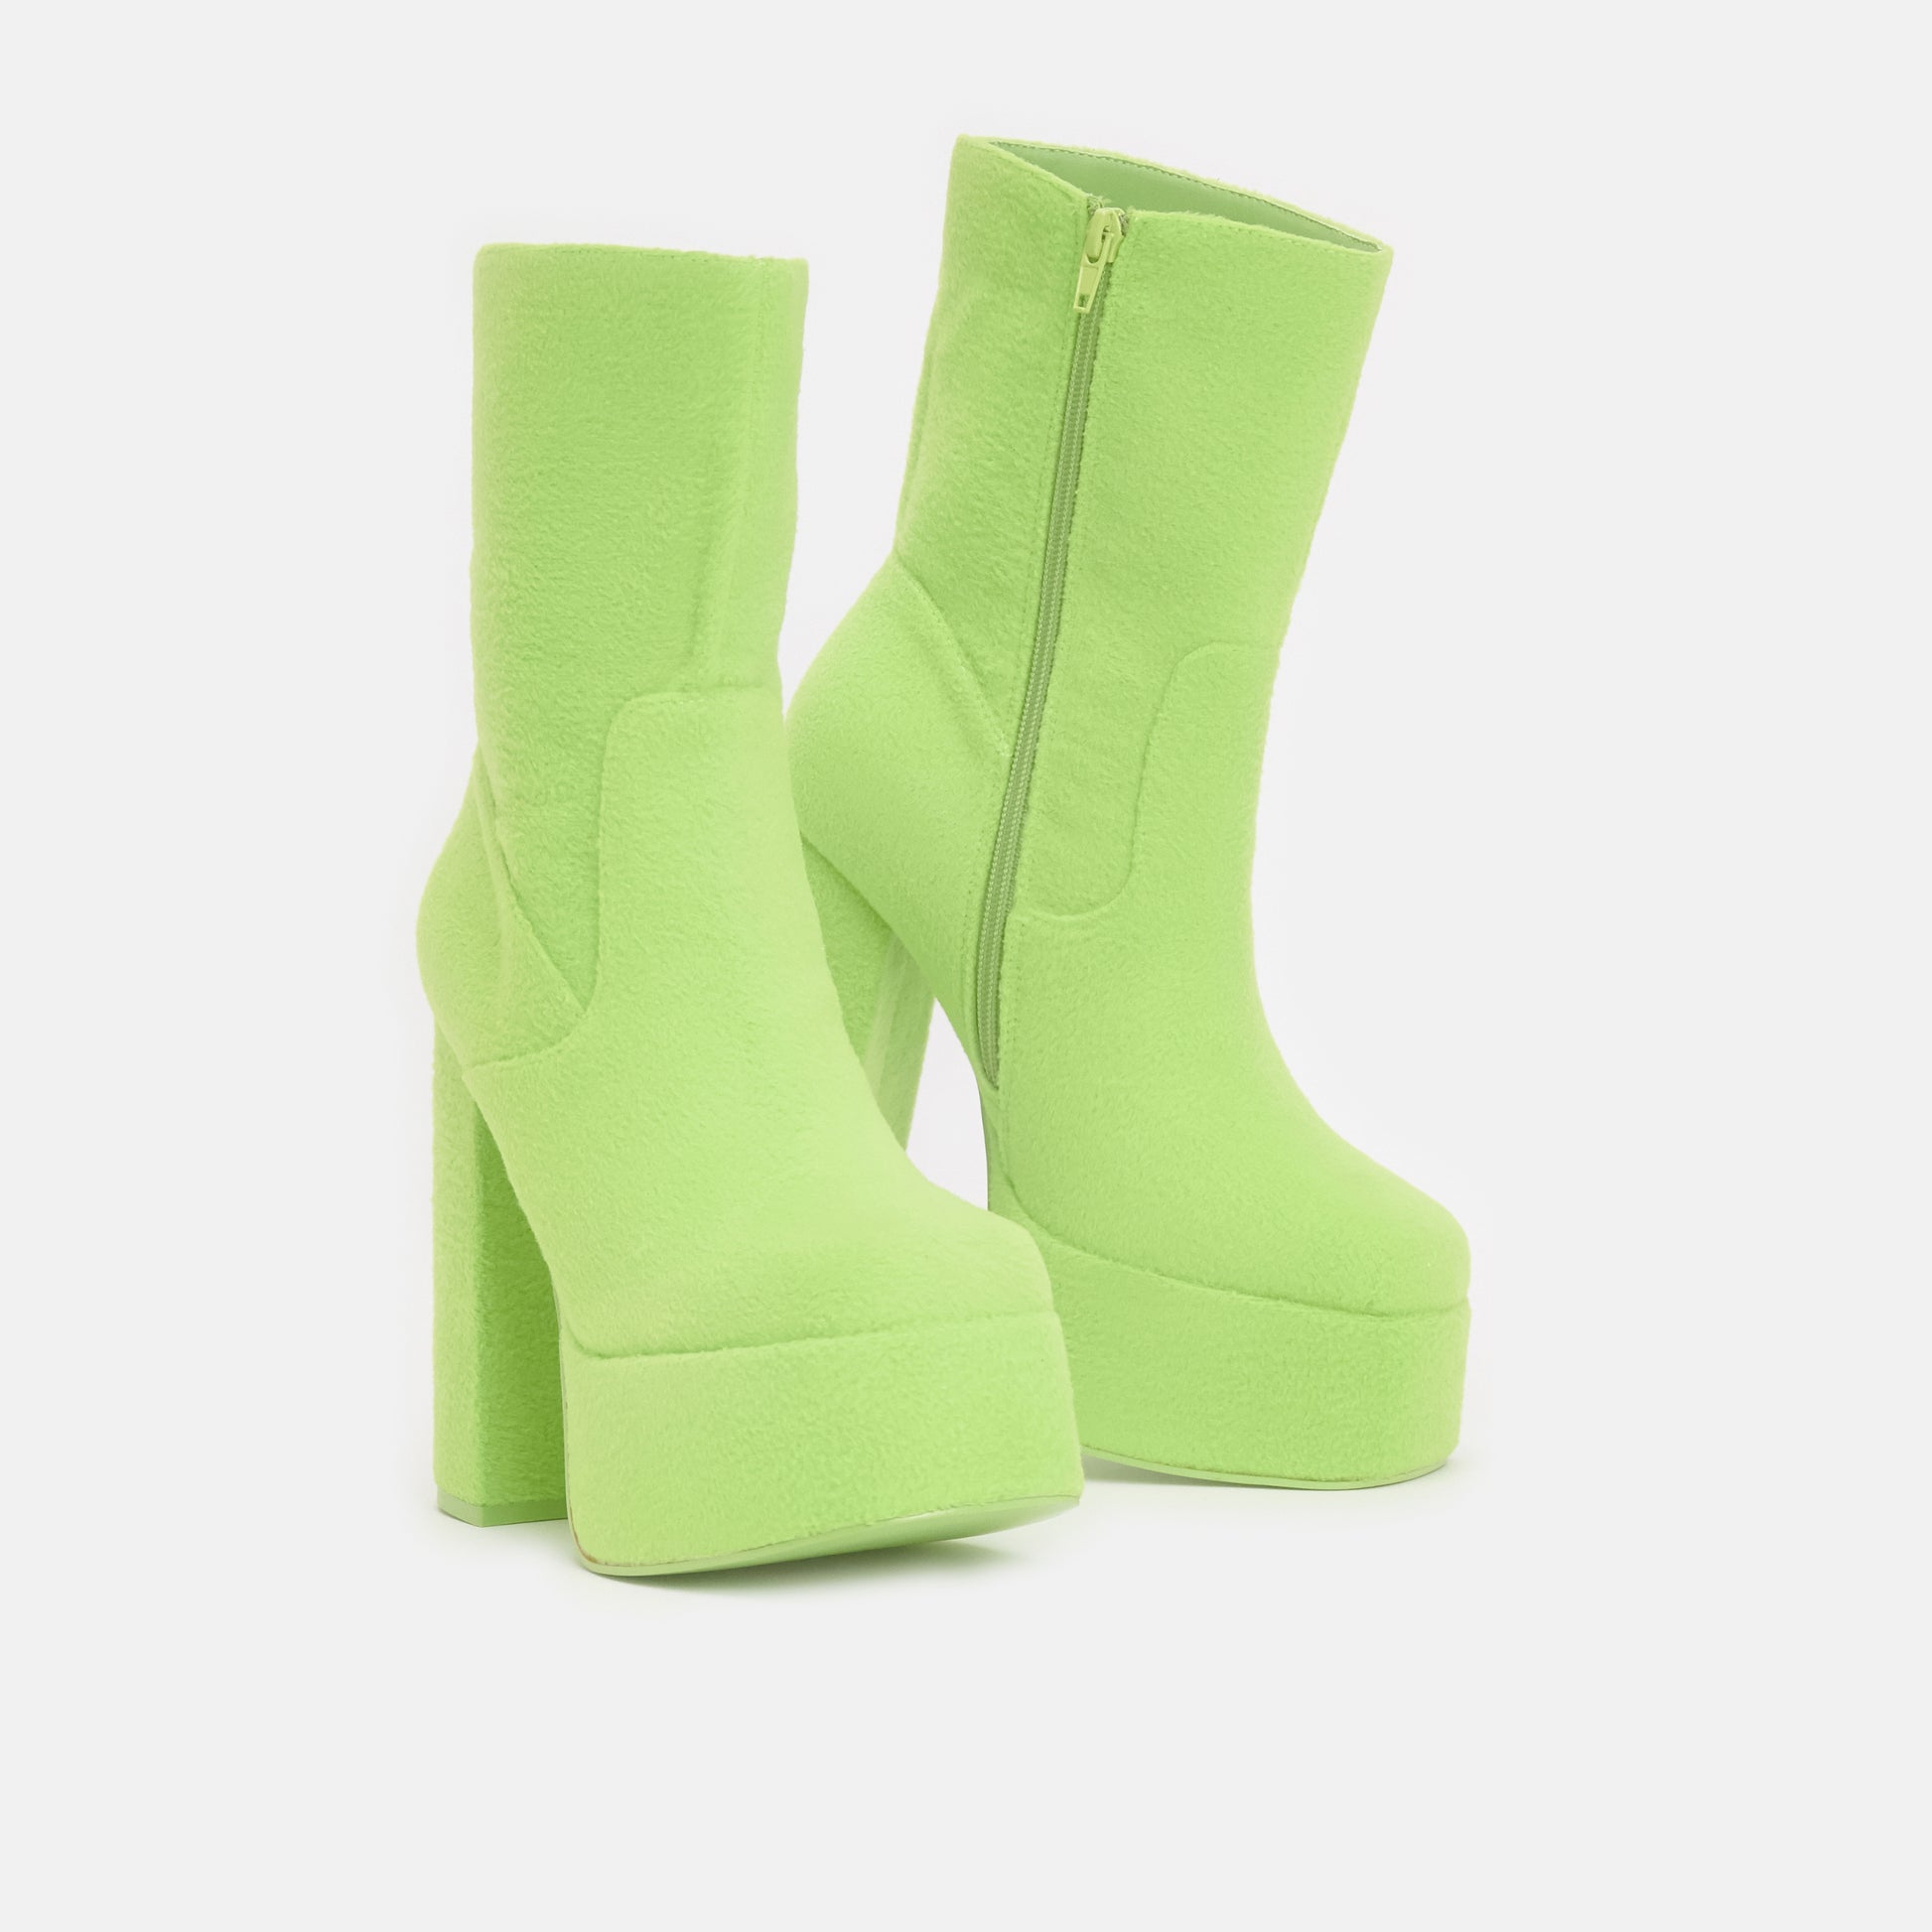 Dipsy Fluffy Platform Boots - Ankle Boots - KOI Footwear - Green - Front and Side View